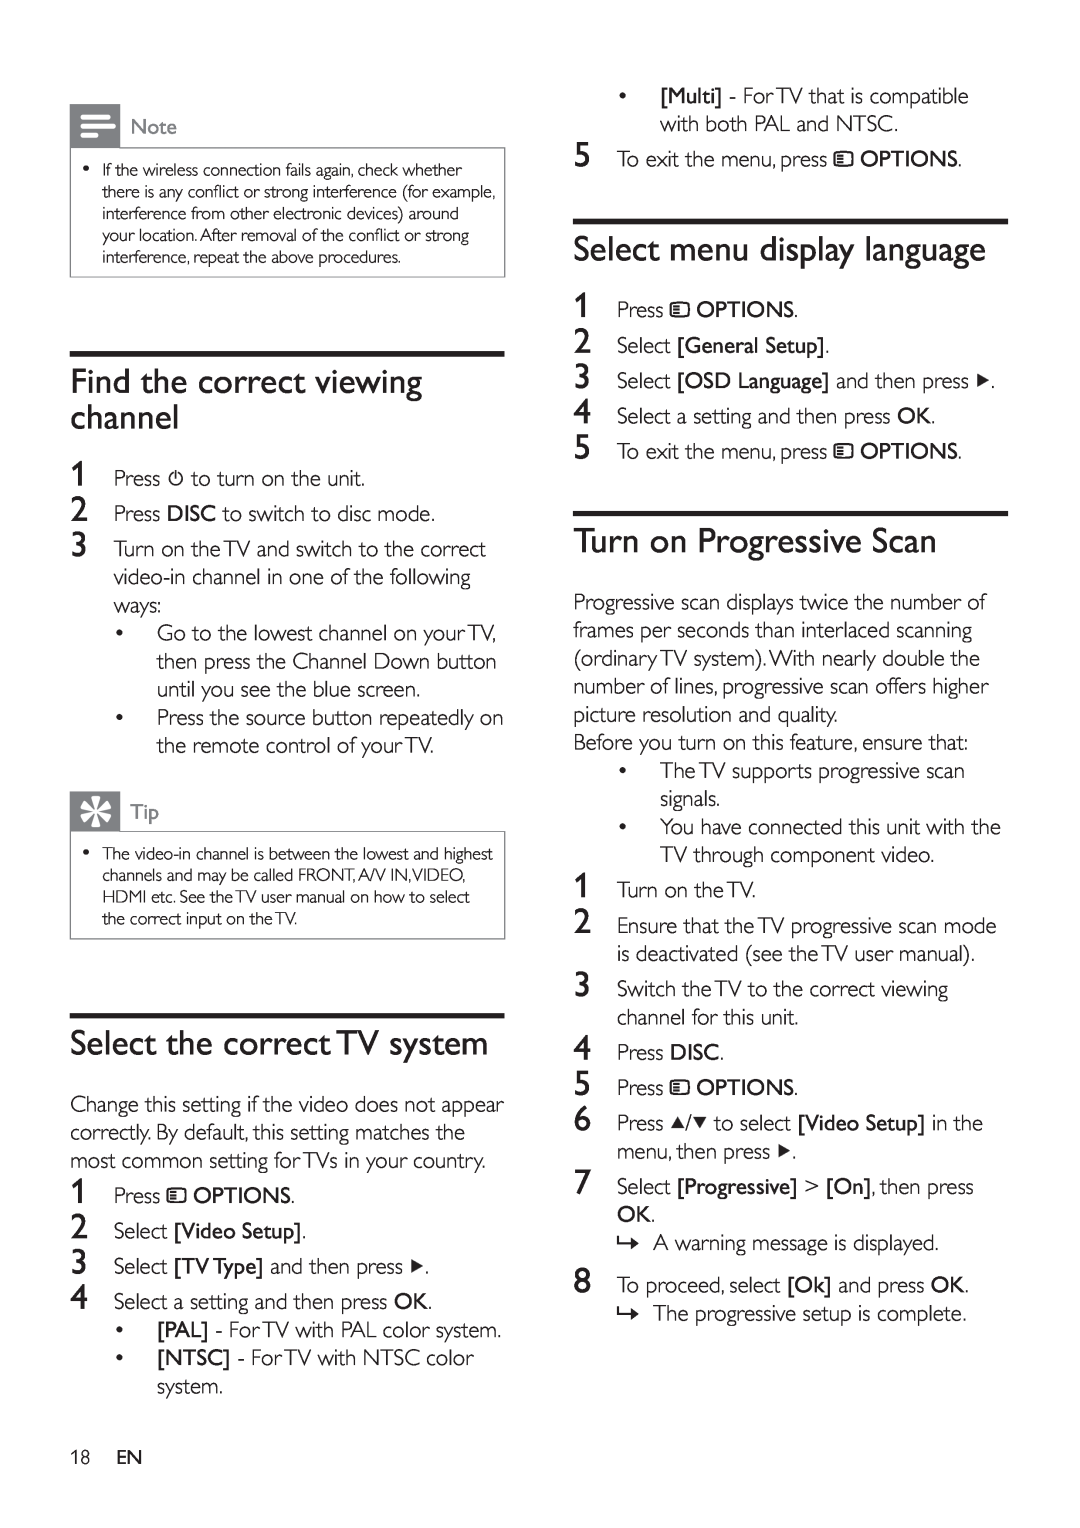 Philips HSB4383/12 user manual Find the correct viewing channel, Select the correct TV system, Select menu display language 